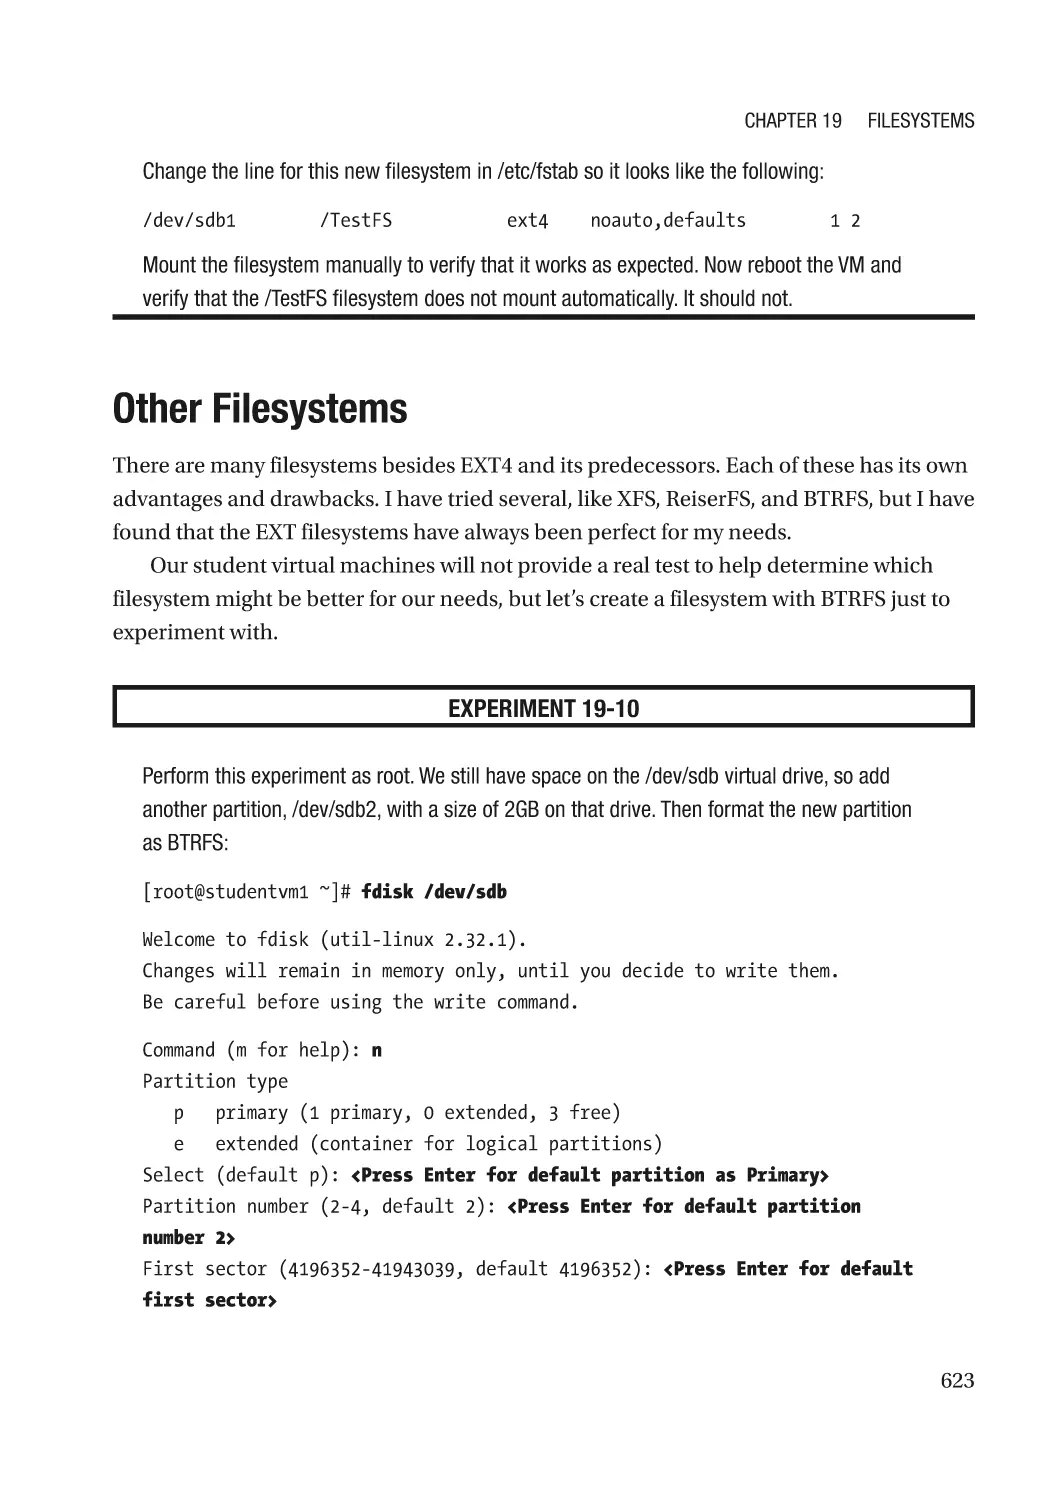 Other Filesystems